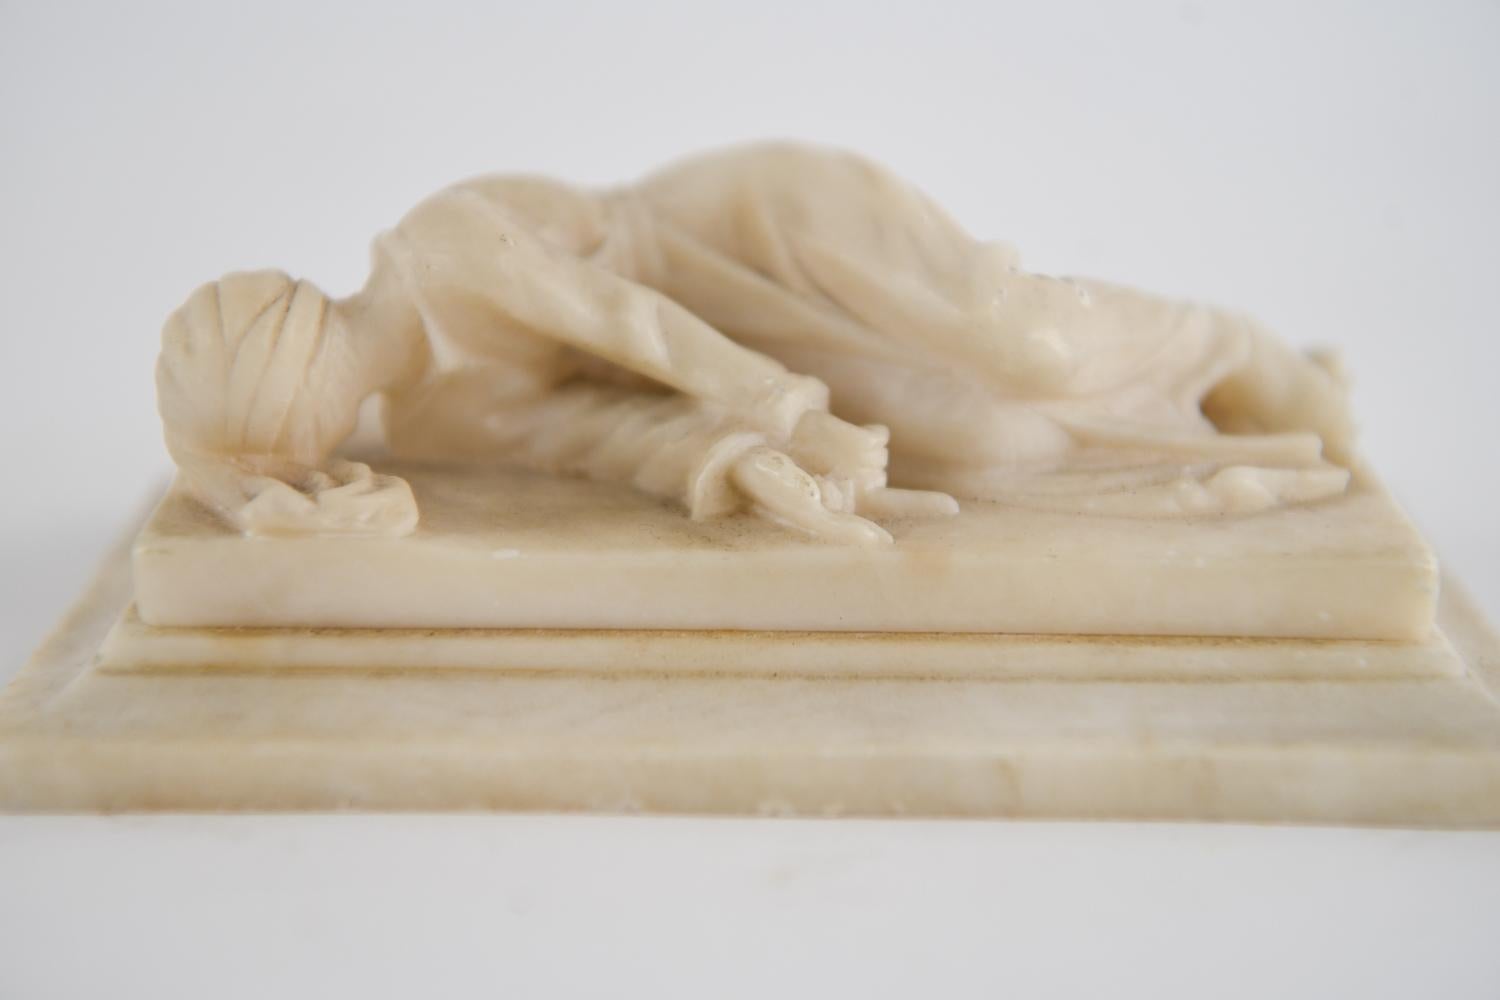 Renaissance 19th C. Alabaster Paperweight After Maderno, 